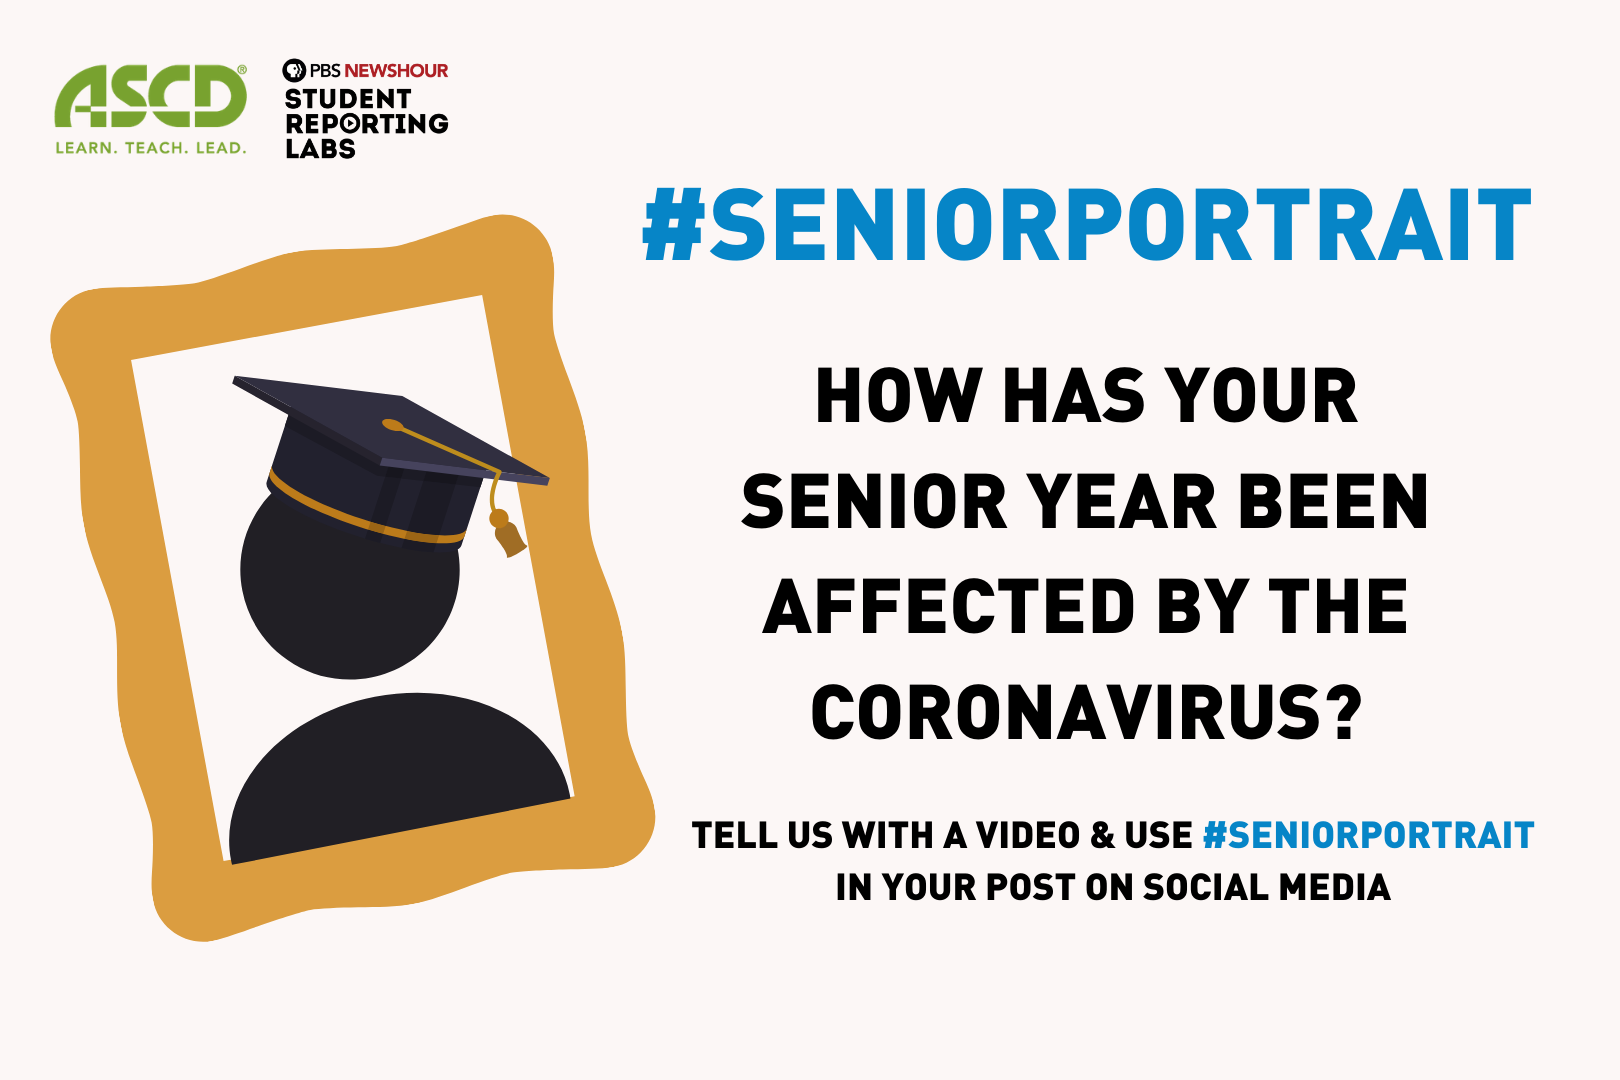 How has your senior year been affected by the coronavirus? Tell us your story by using #SeniorPortrait online - PBS NewsHour Student Reporting Labs